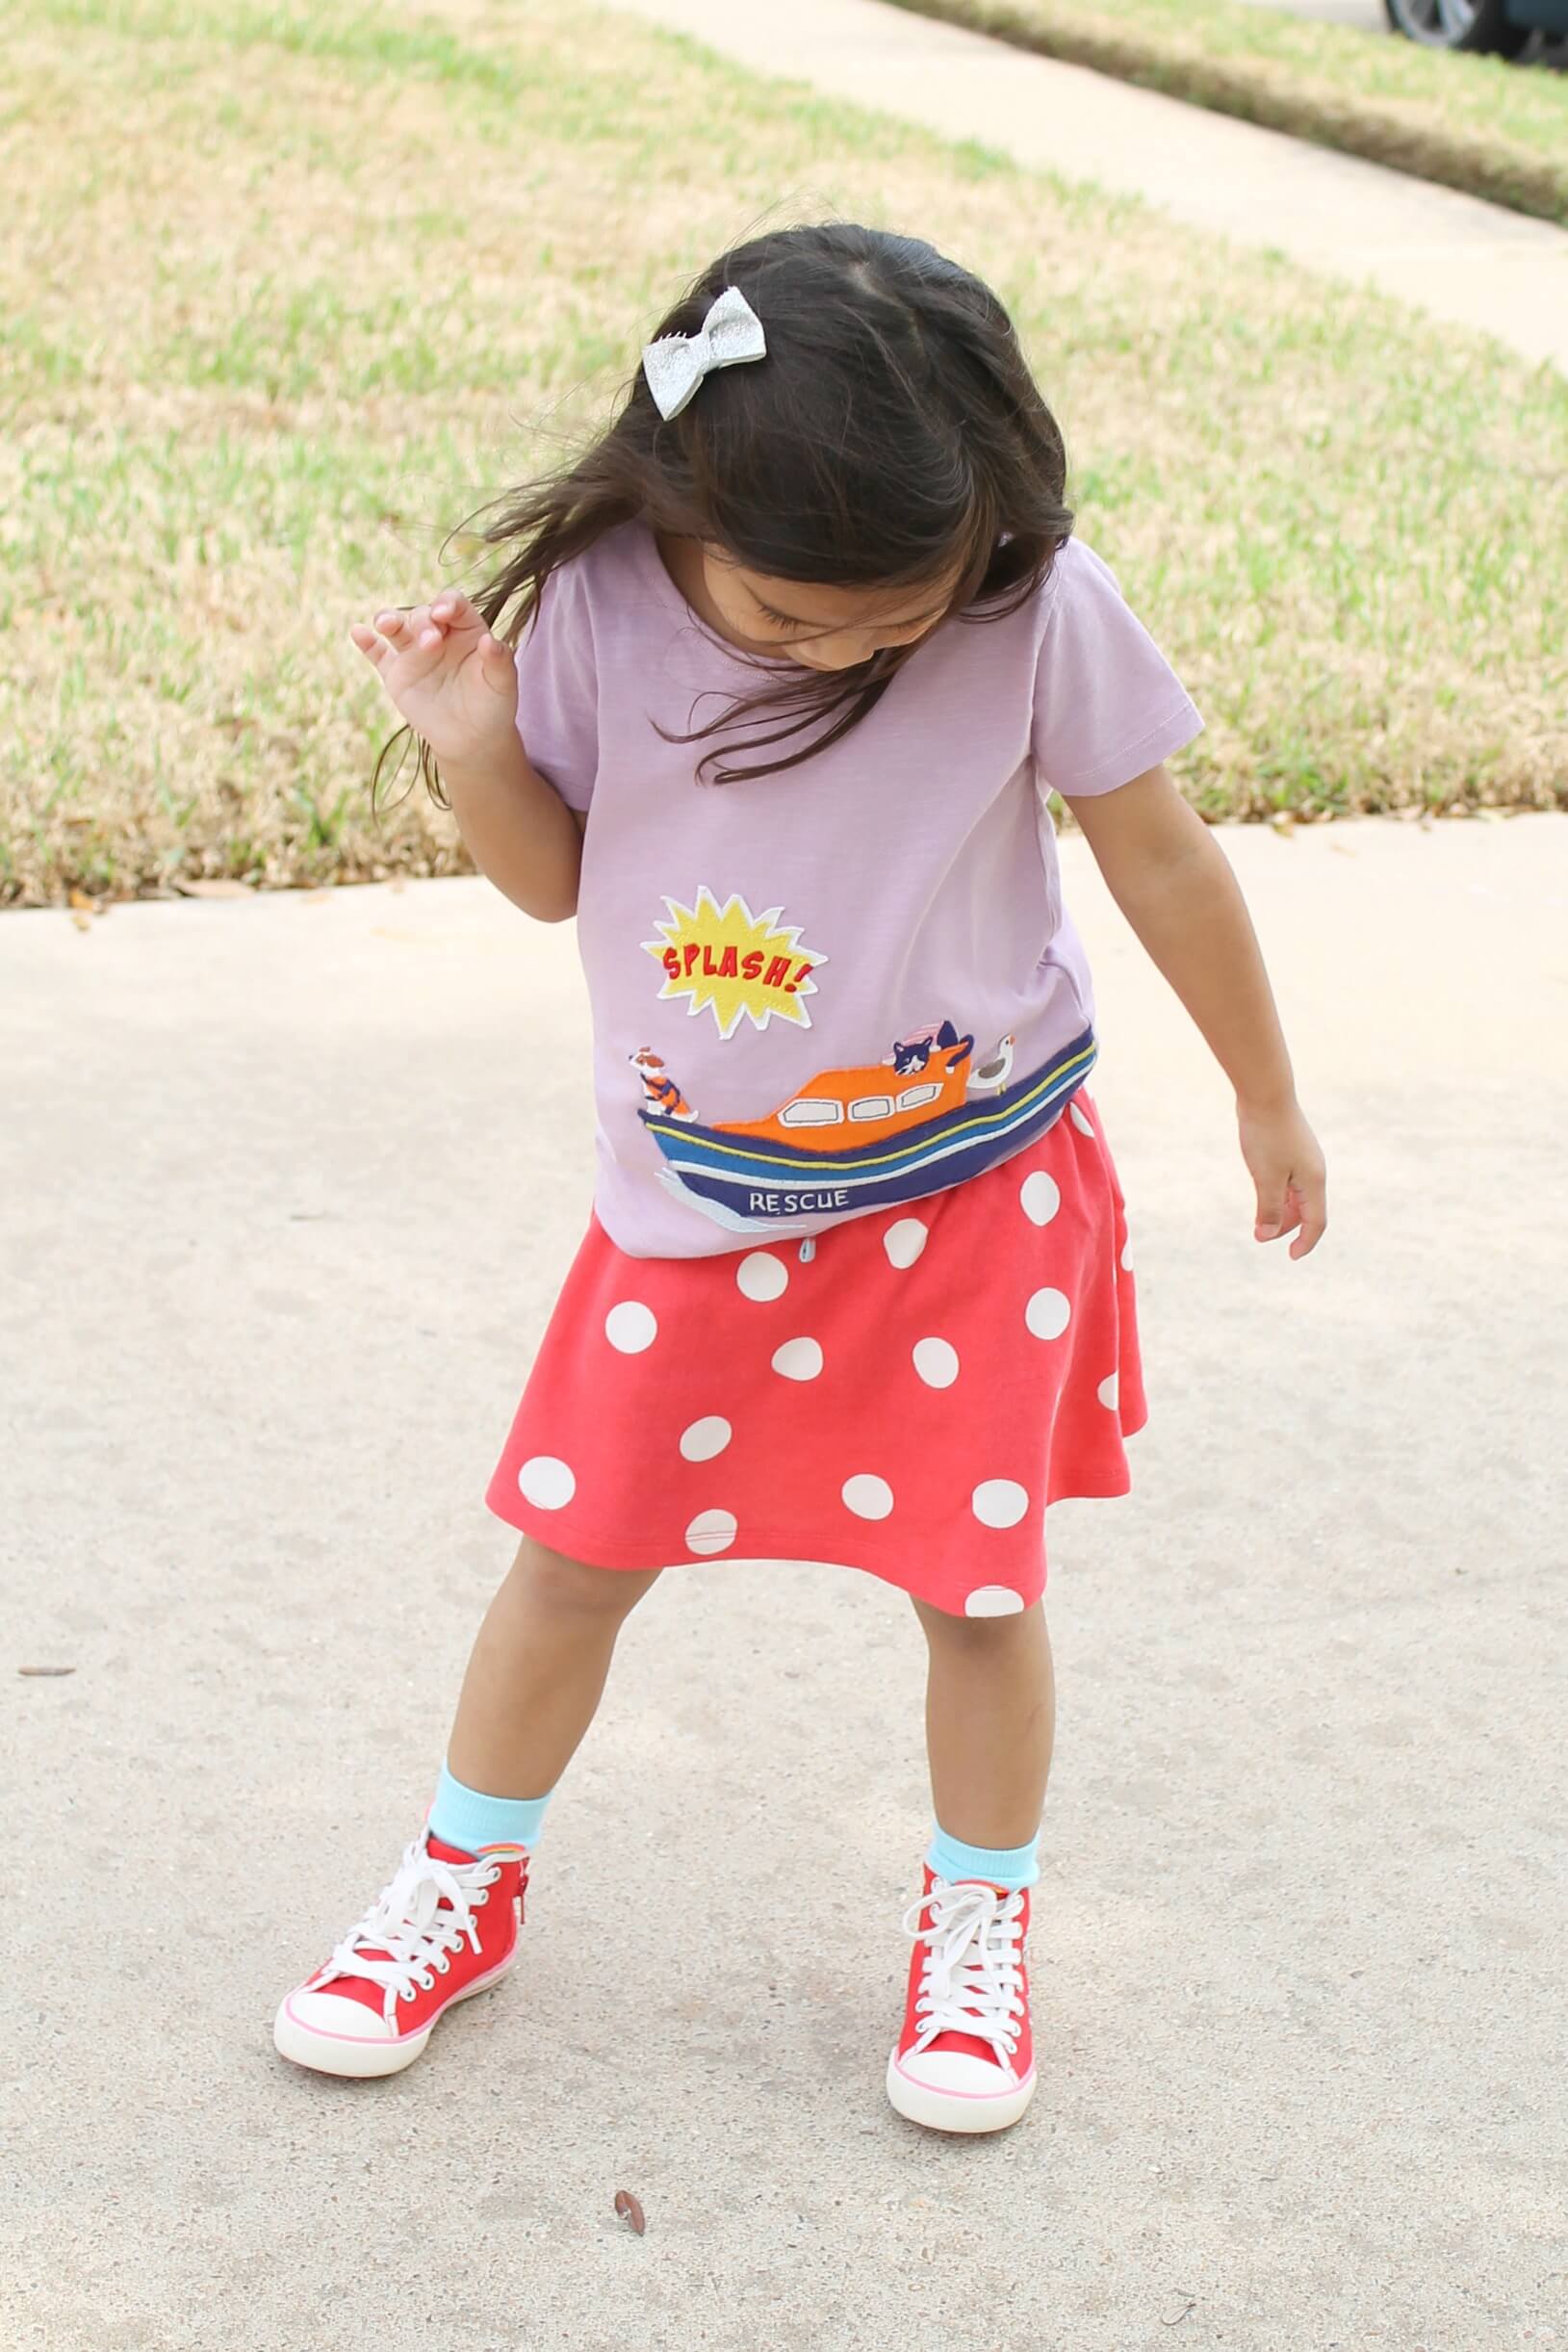 Splash! Cute kids spring clothes with a hero & rescue theme. Mini Boden's spring line & 500 giveaway! #minibodentotherescue